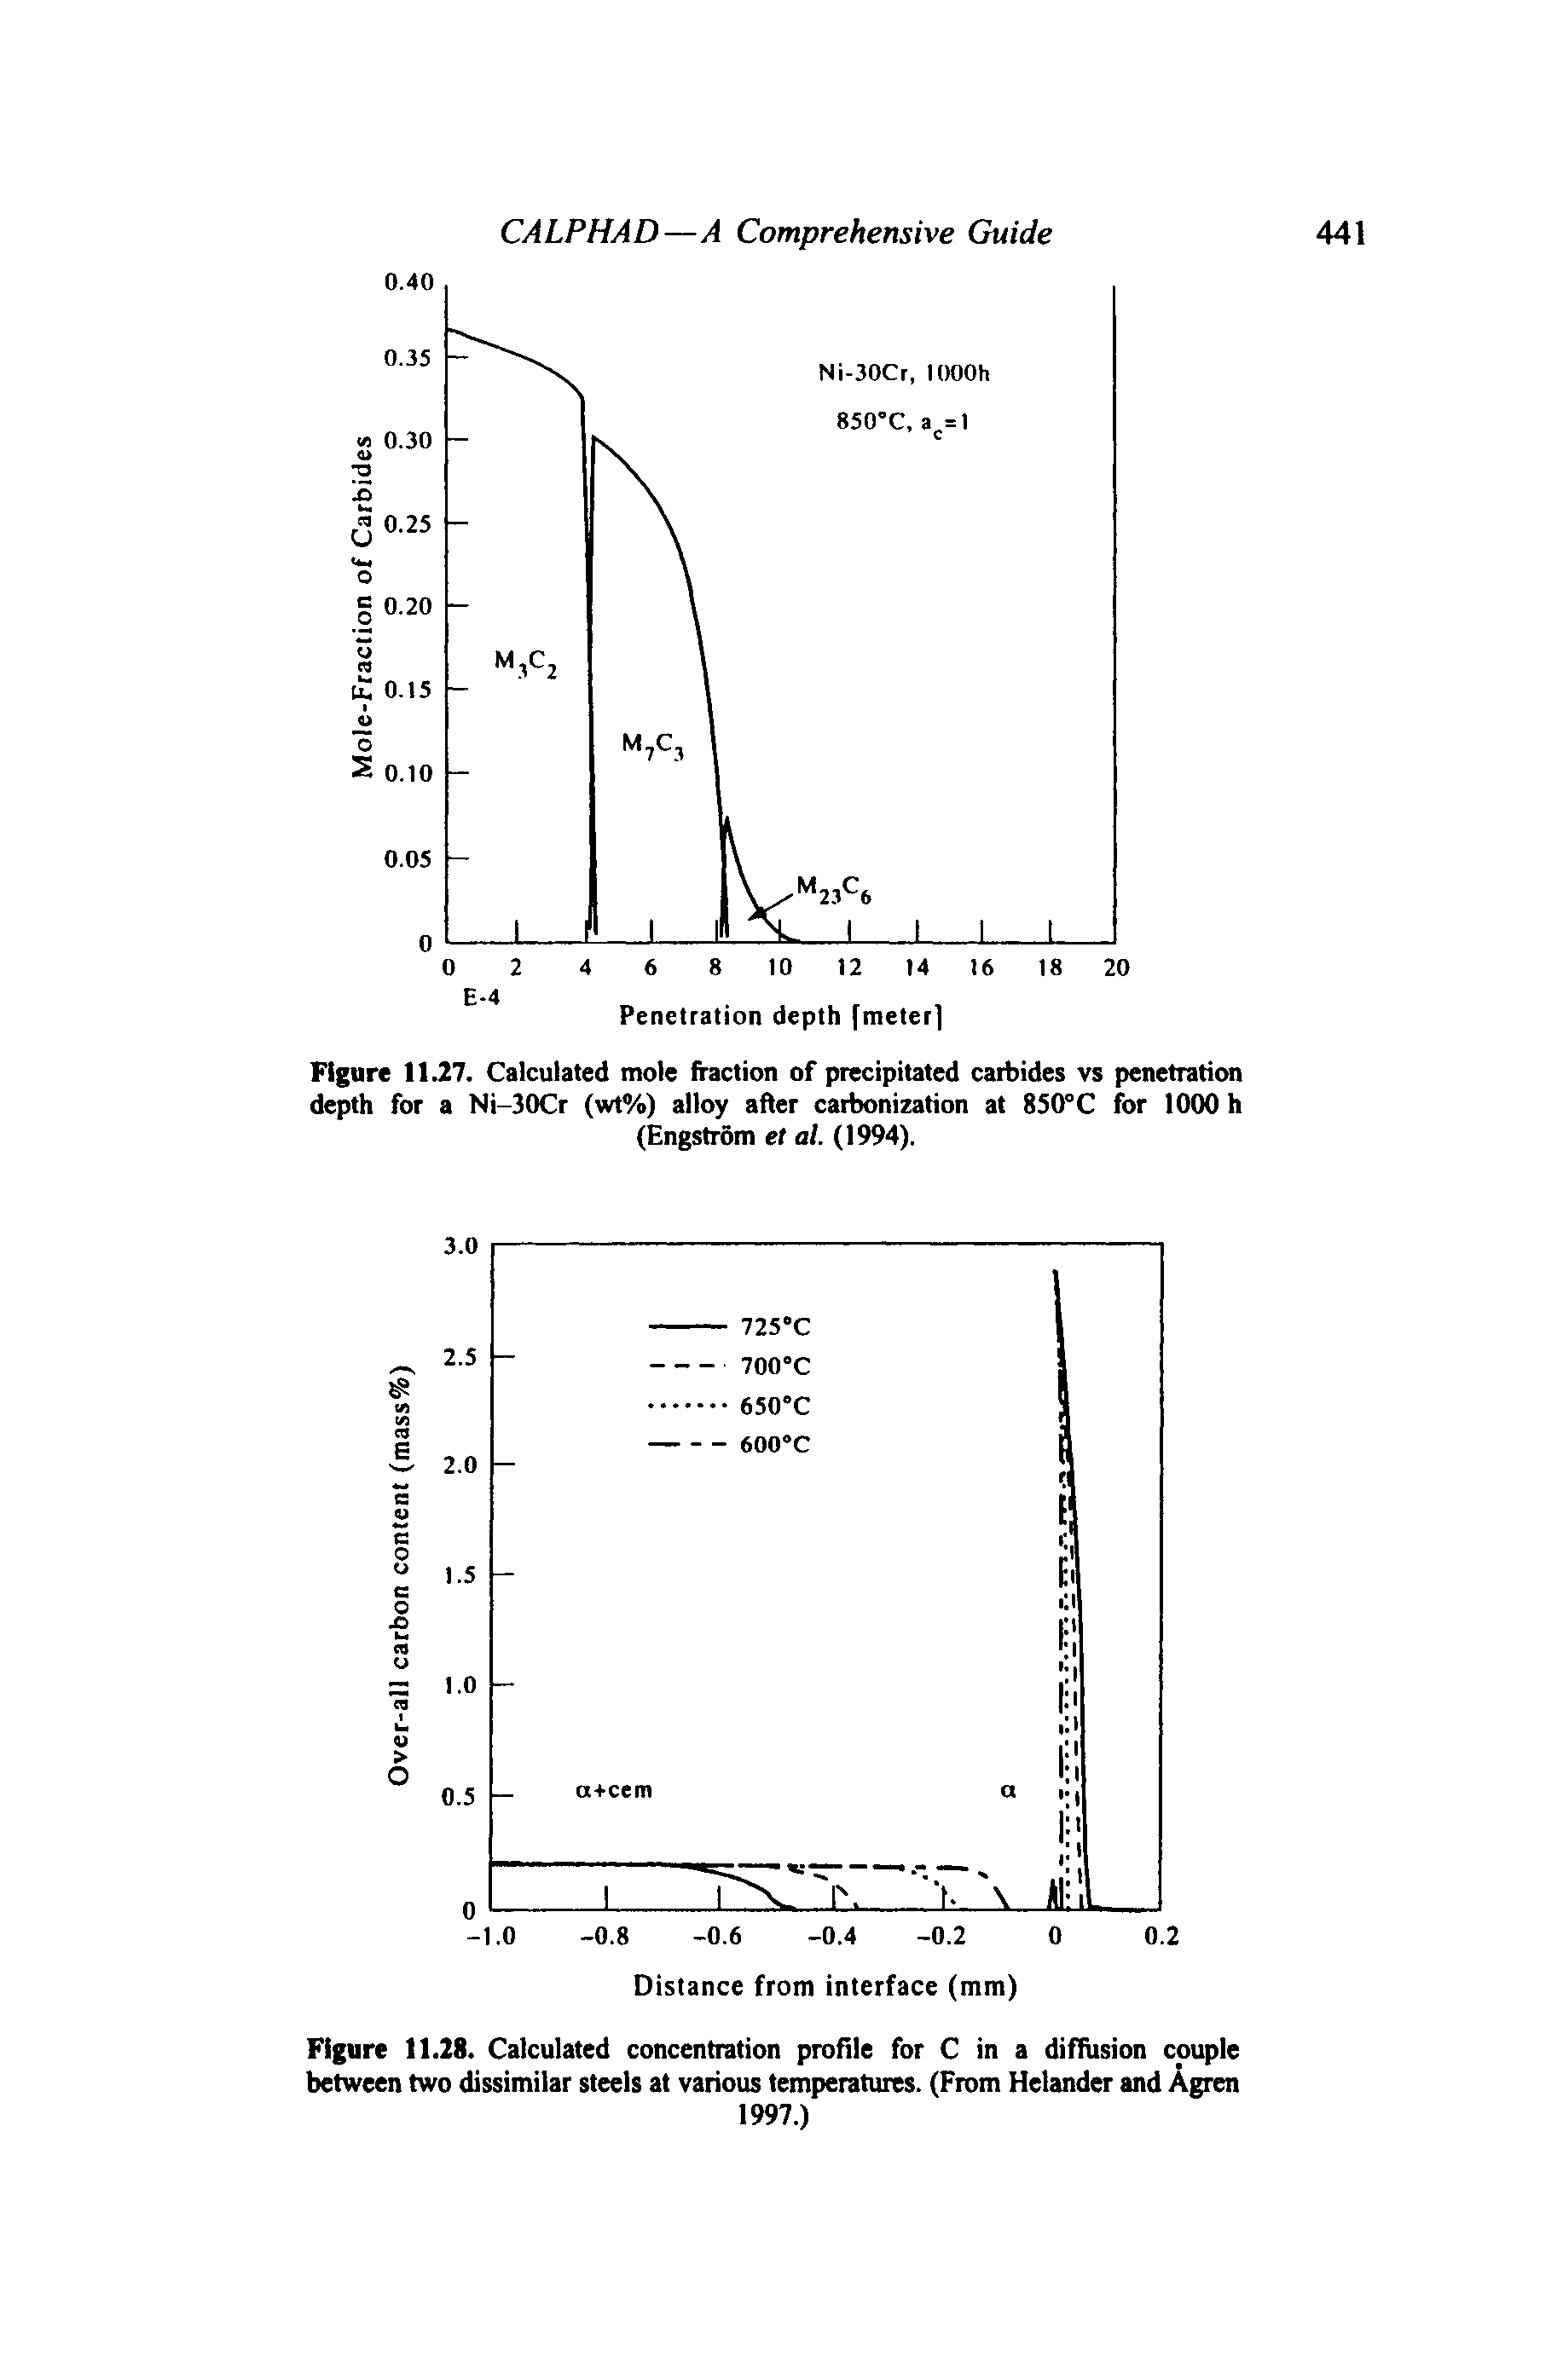 Figure 11.27. Calculated mole fraction of precipitated carbides vs penetration depth for a Ni-30Cr (wt%) alloy after carbonization at 850°C for 1000 h (Engstrom et al. (1994).